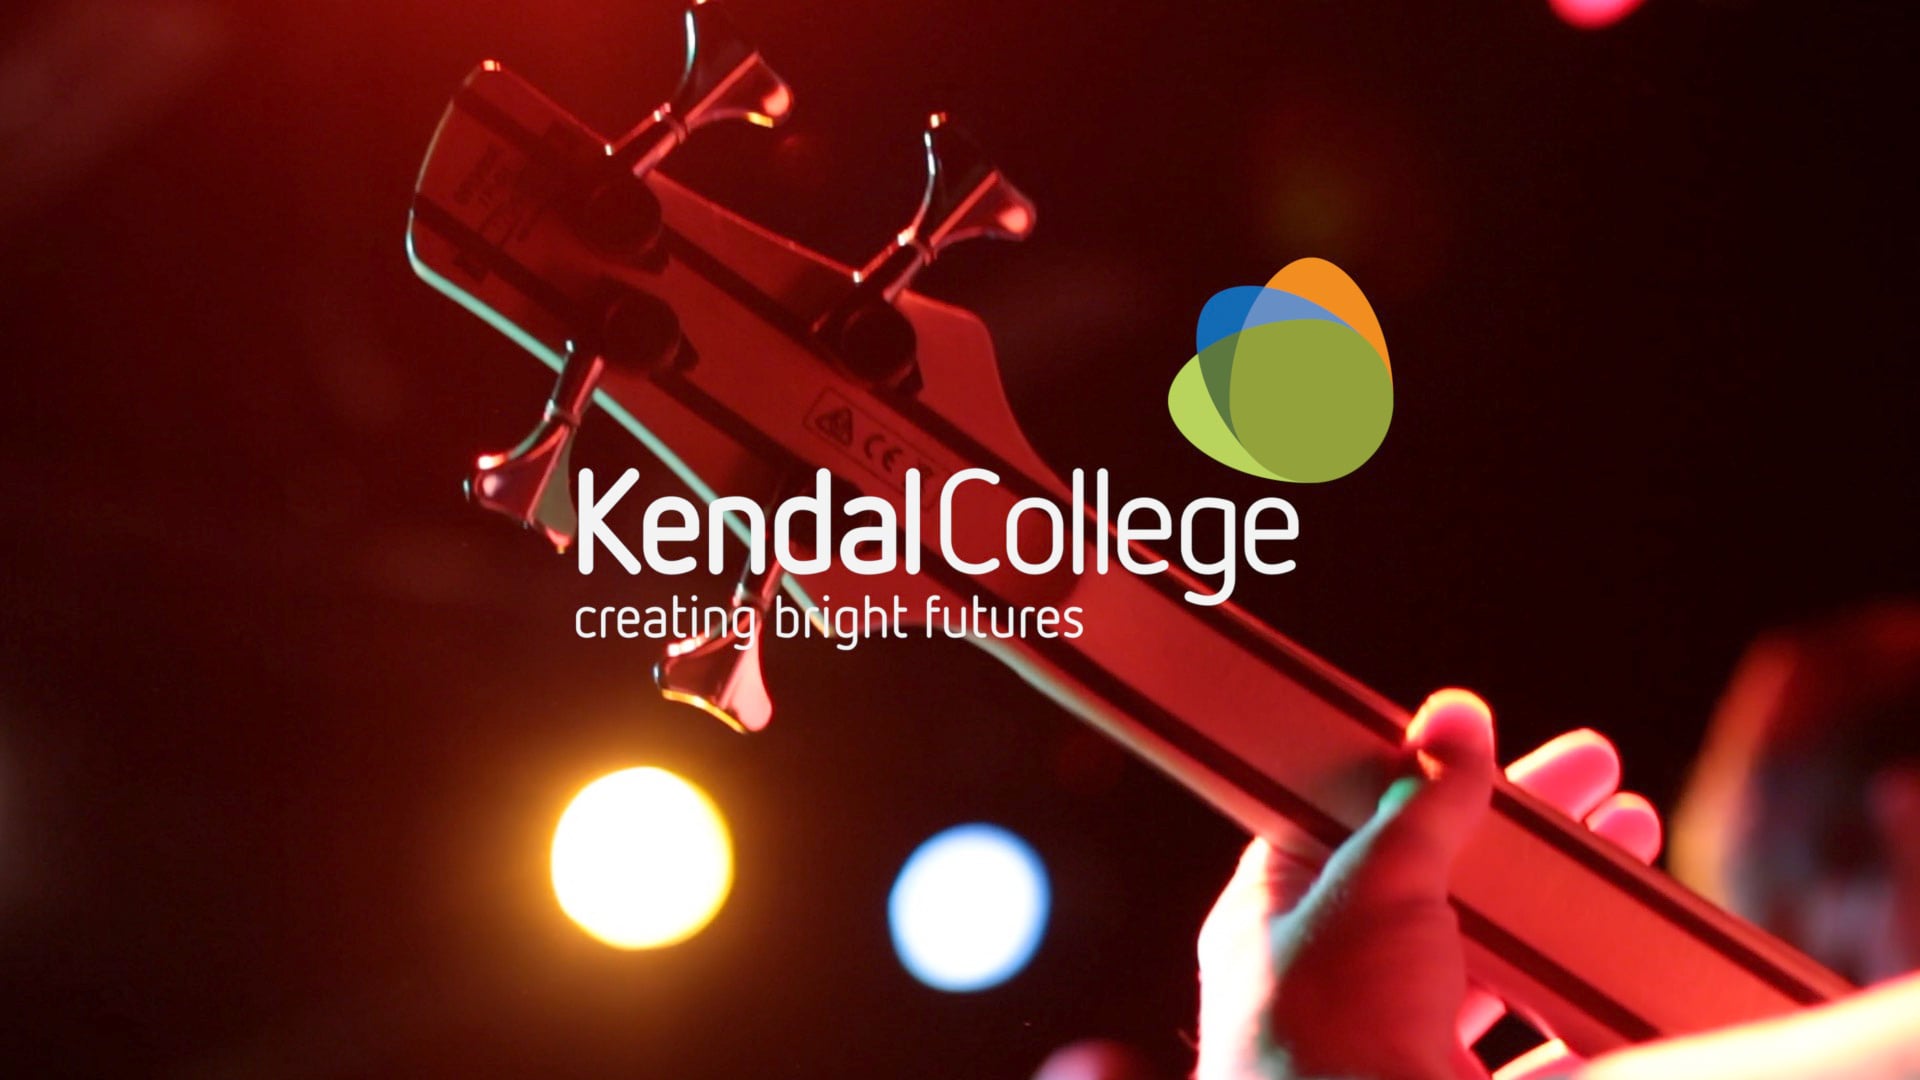 Welcome to Kendal College